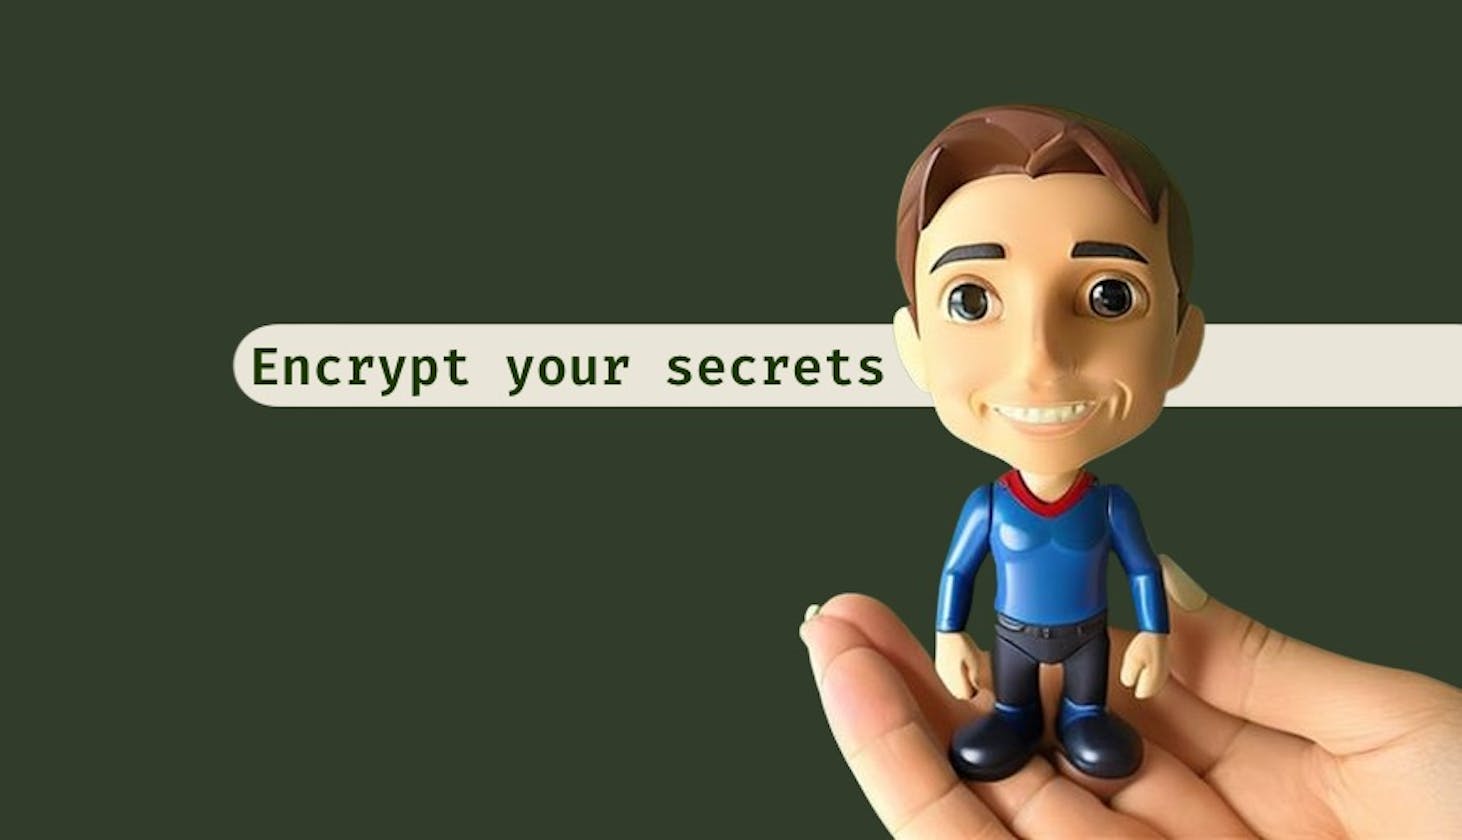 All right then, keep your secrets in Git with SOPS